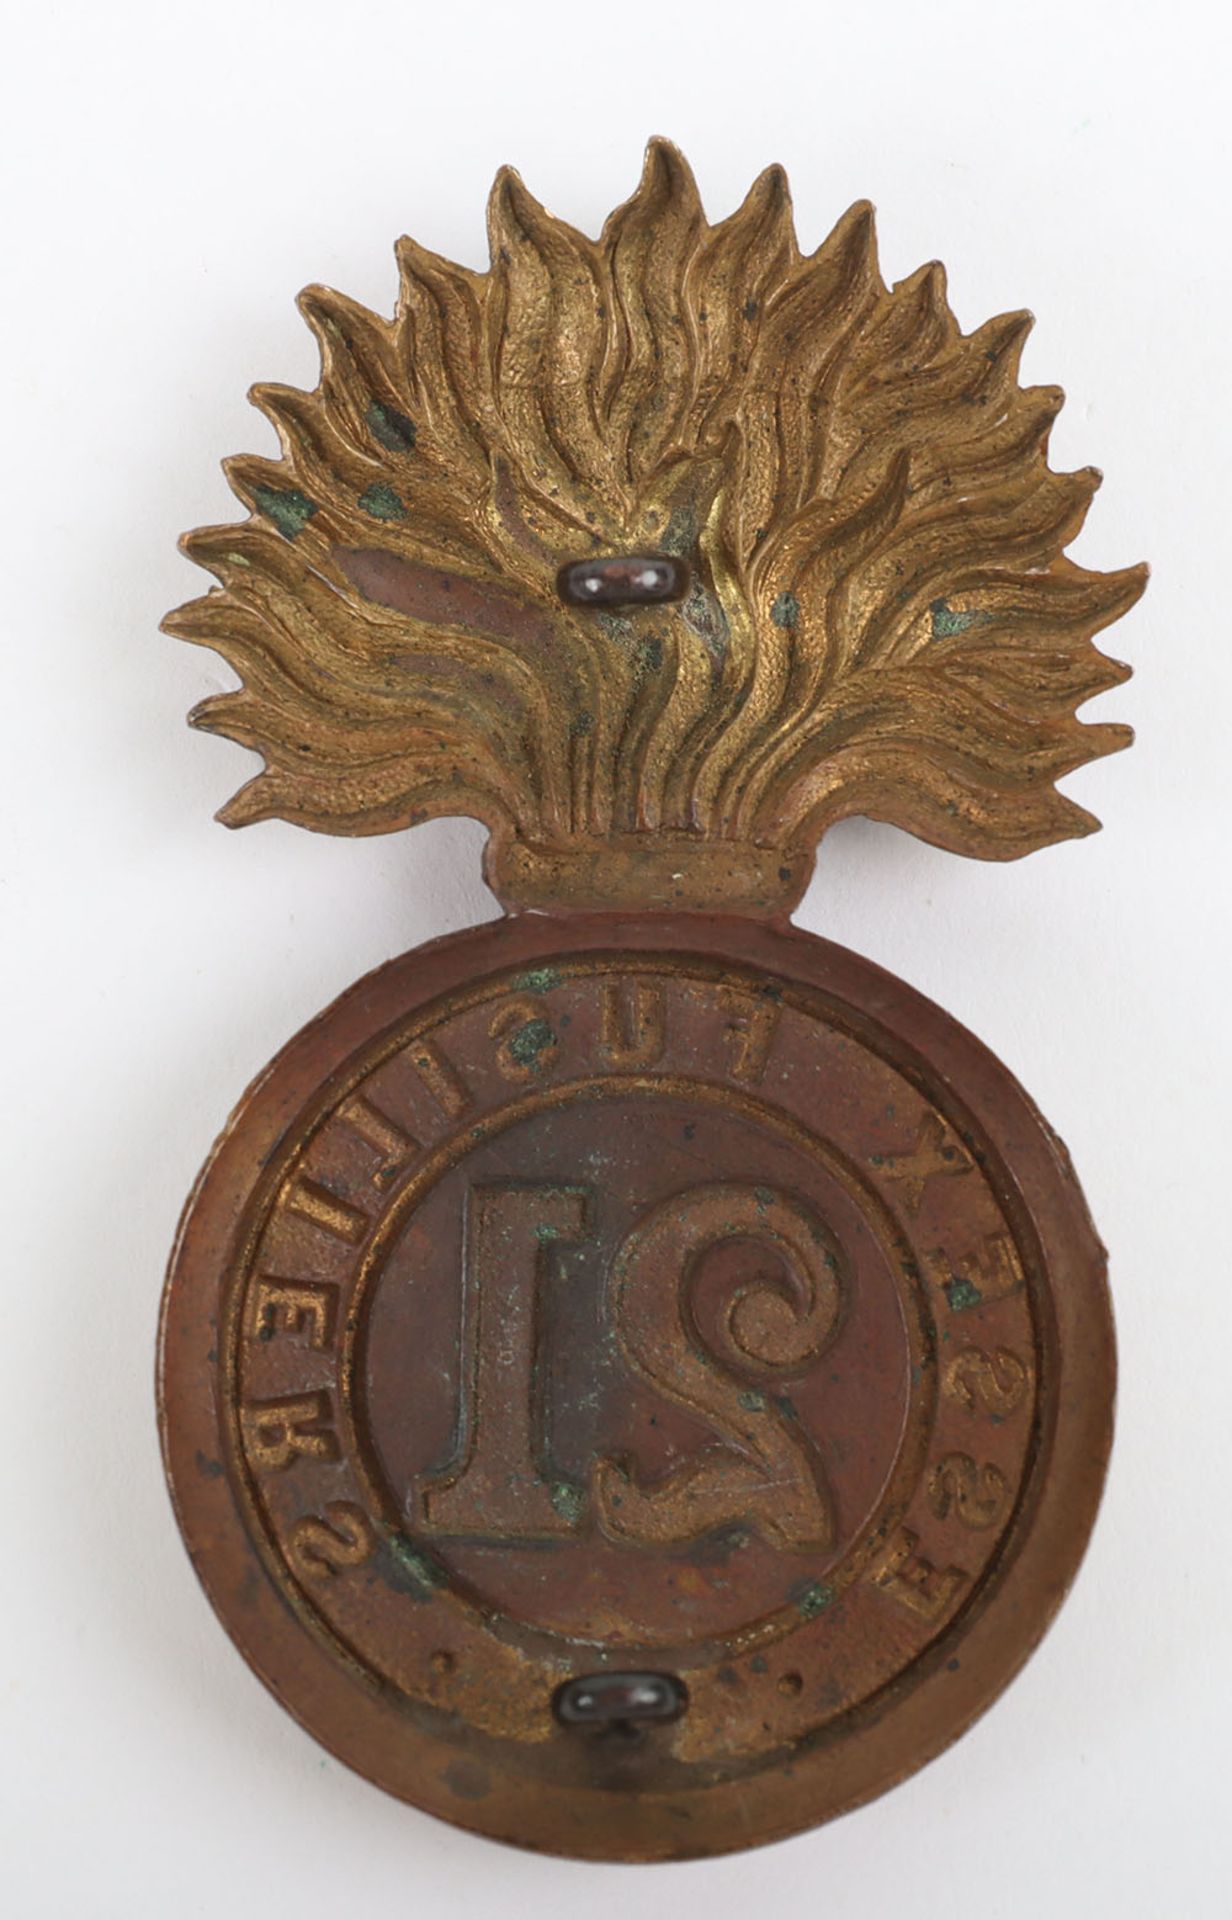 Canadian 21st Essex Fusiliers Busby Grenade 1912-14 - Image 2 of 2